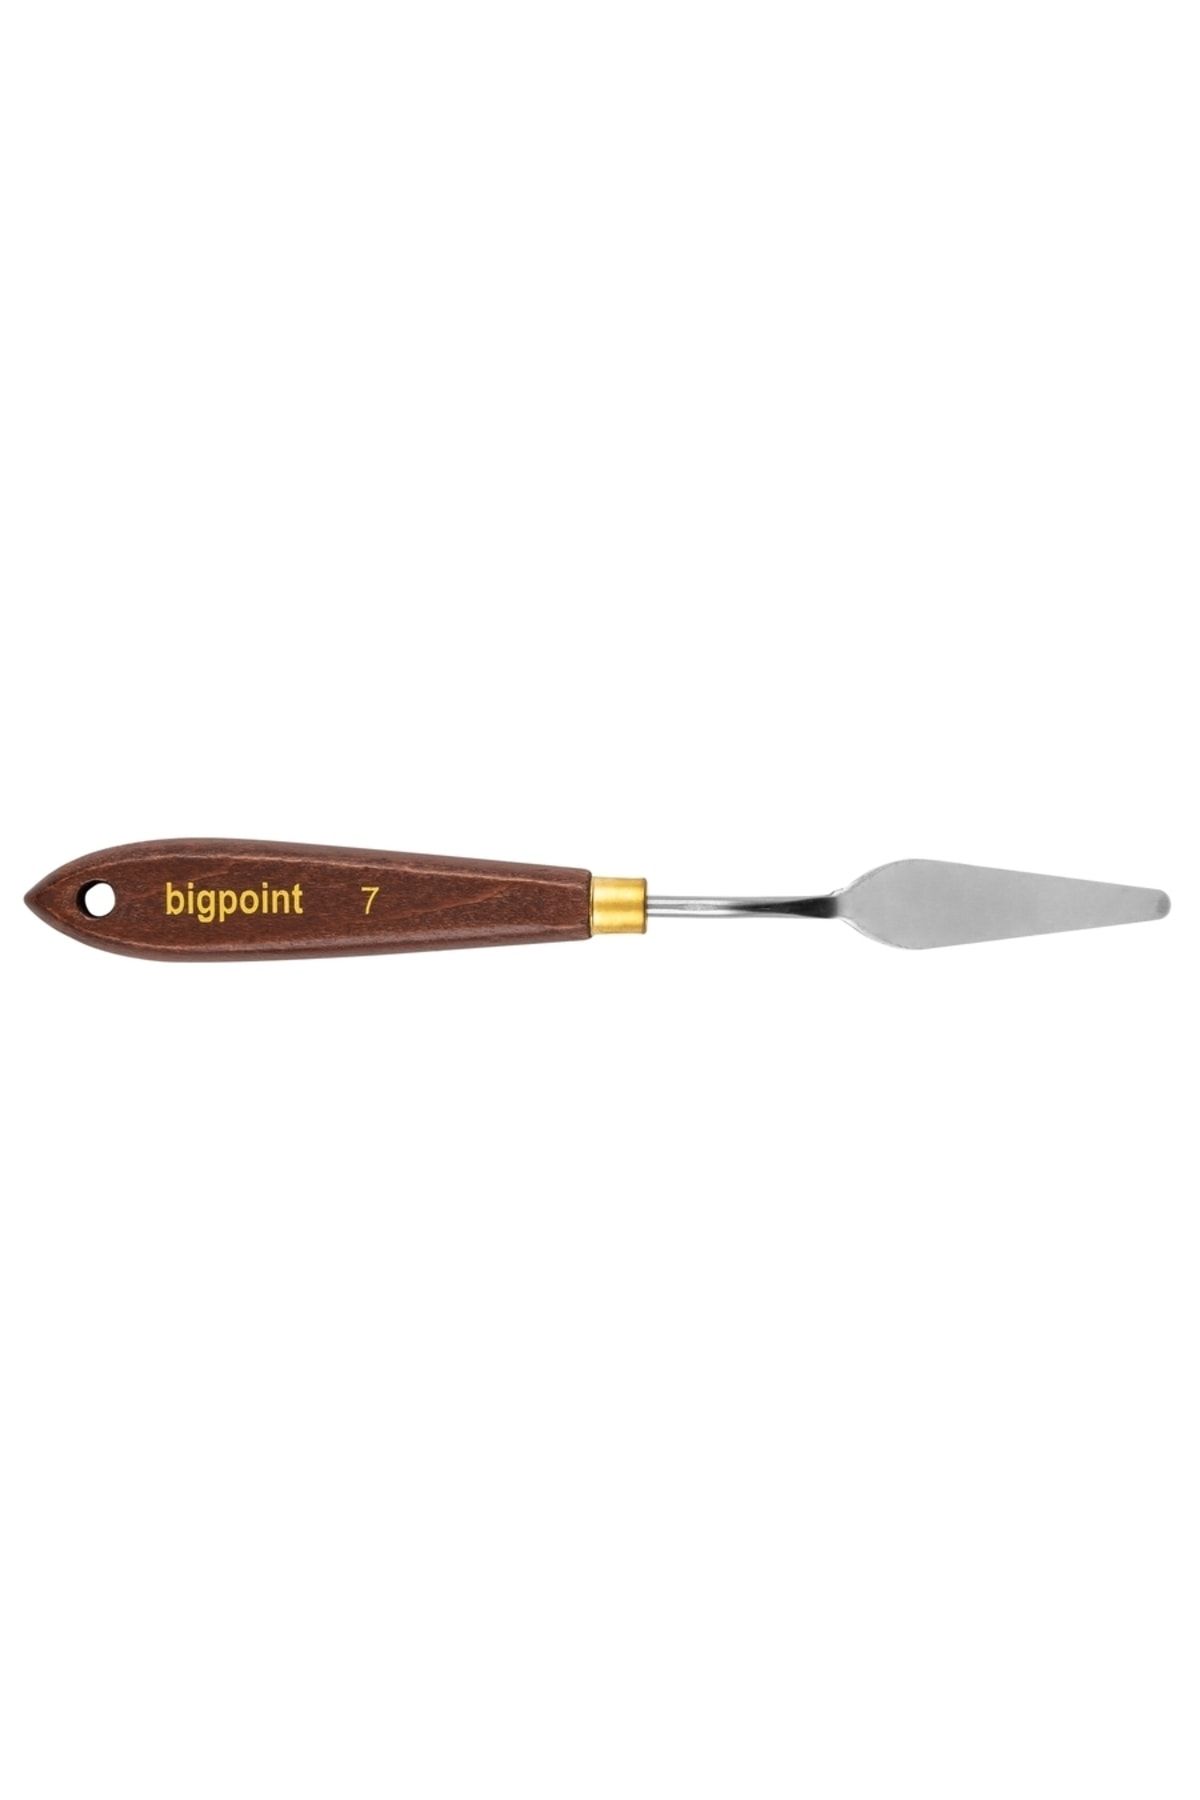 Bigpoint Metal Spatula No: 7 (painting Knife)